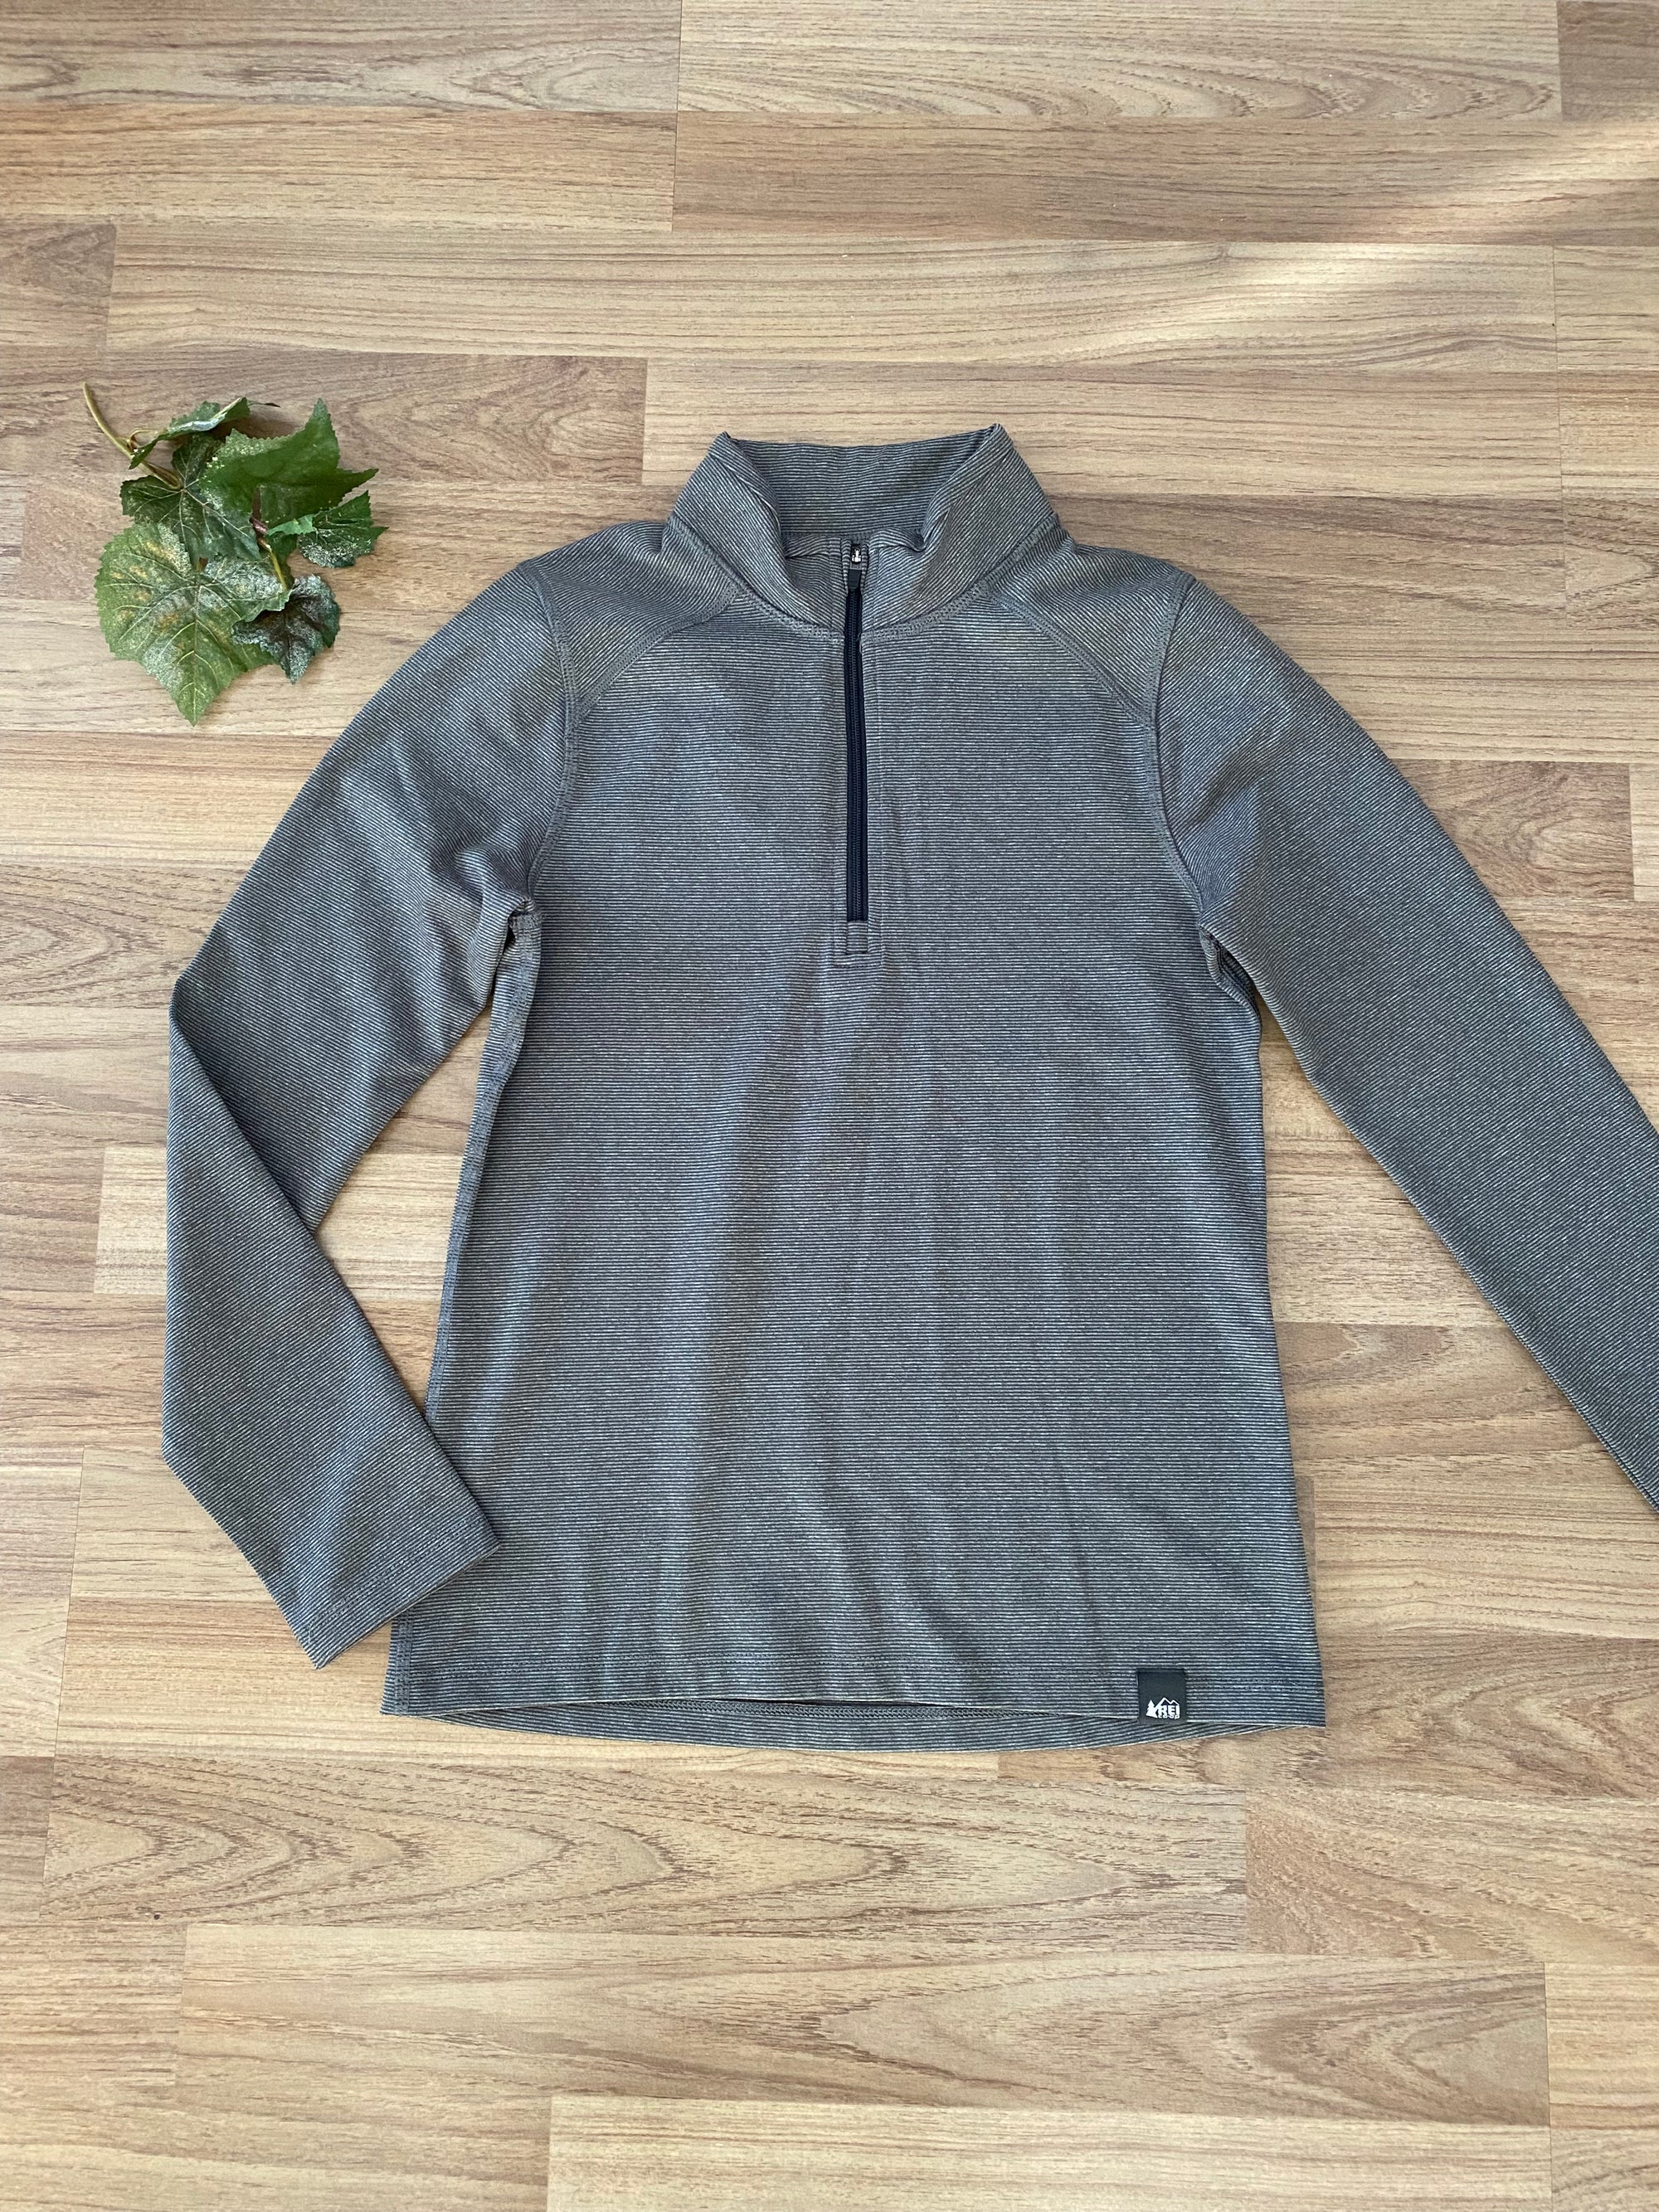 3/4" Zip Up Sweater (Boys Size 10-12)